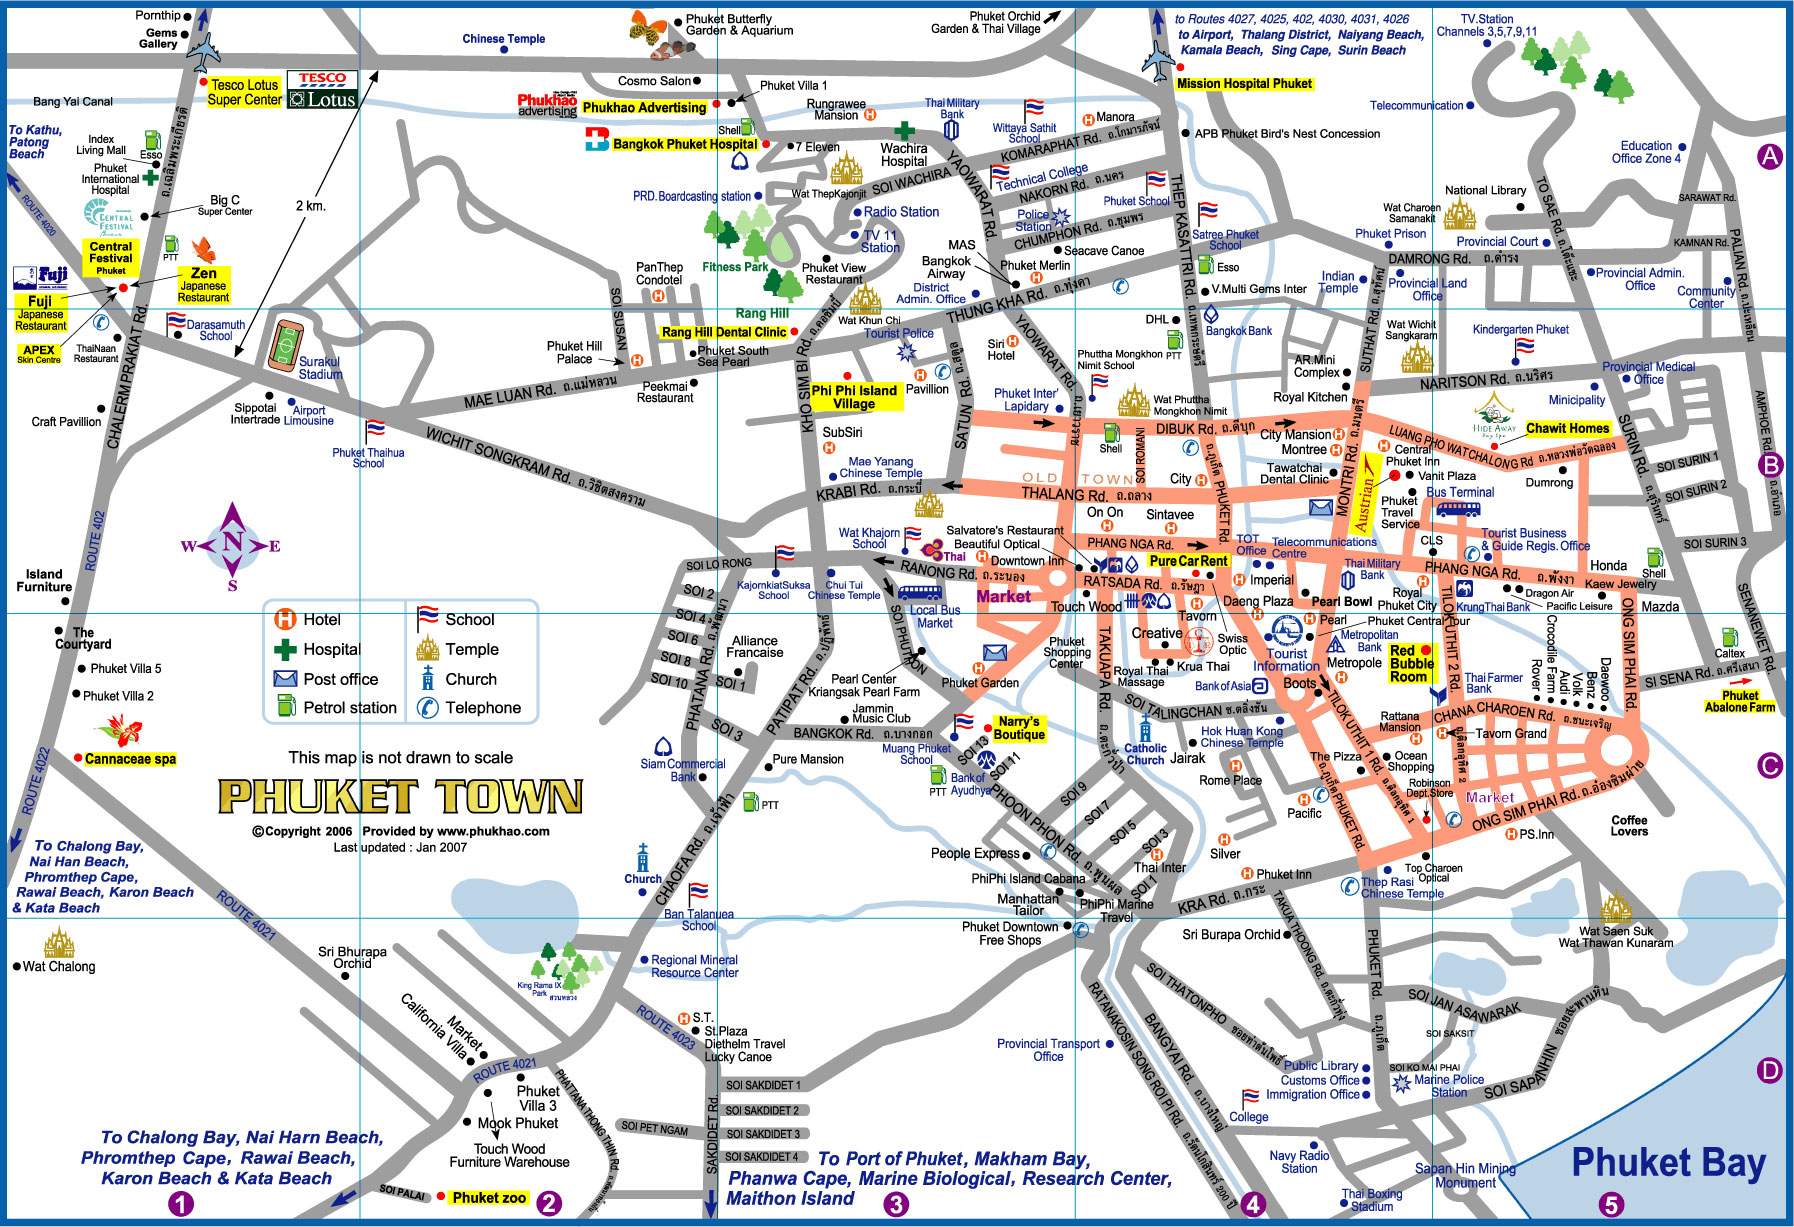 A road map of the Phuket Town